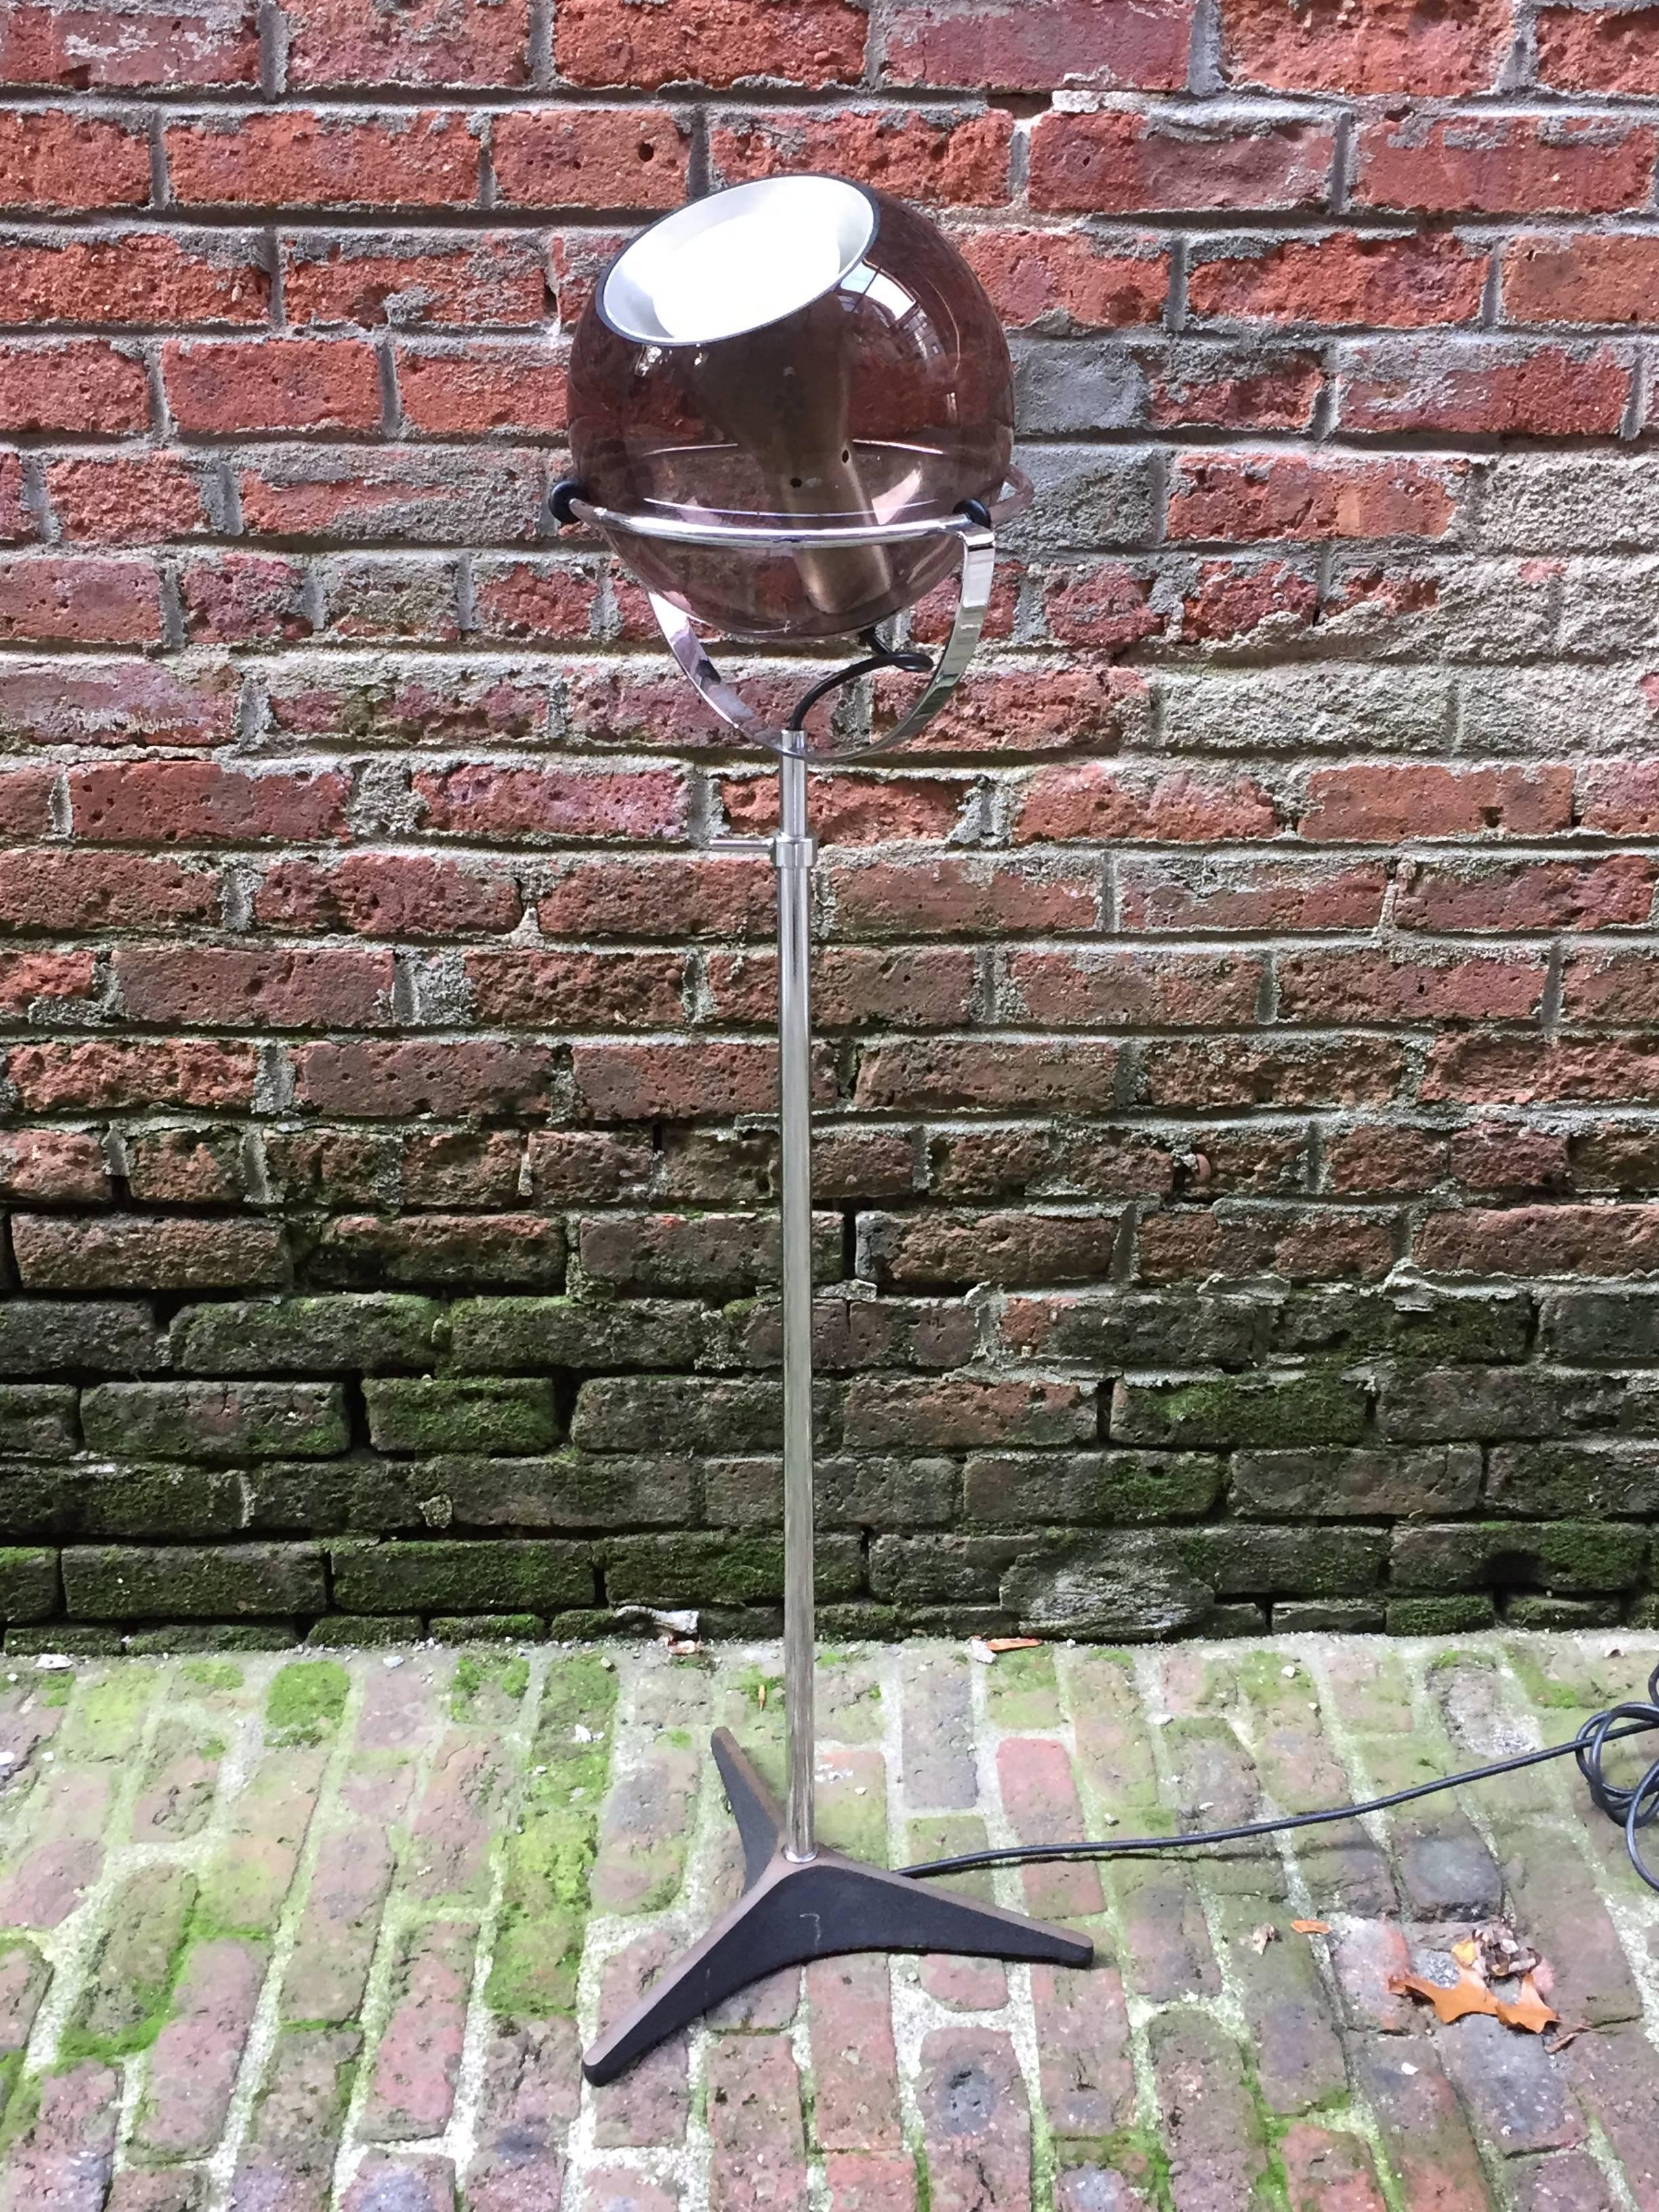 Designed by Frank Ligtelijn for RAAK, Netherlands, circa 1970. Beautiful in its simplicity. Fully adjustable height along with the globe. Made of chrome-plated steel, aluminum with a smoked glass globe. Very good, original condition.

The base